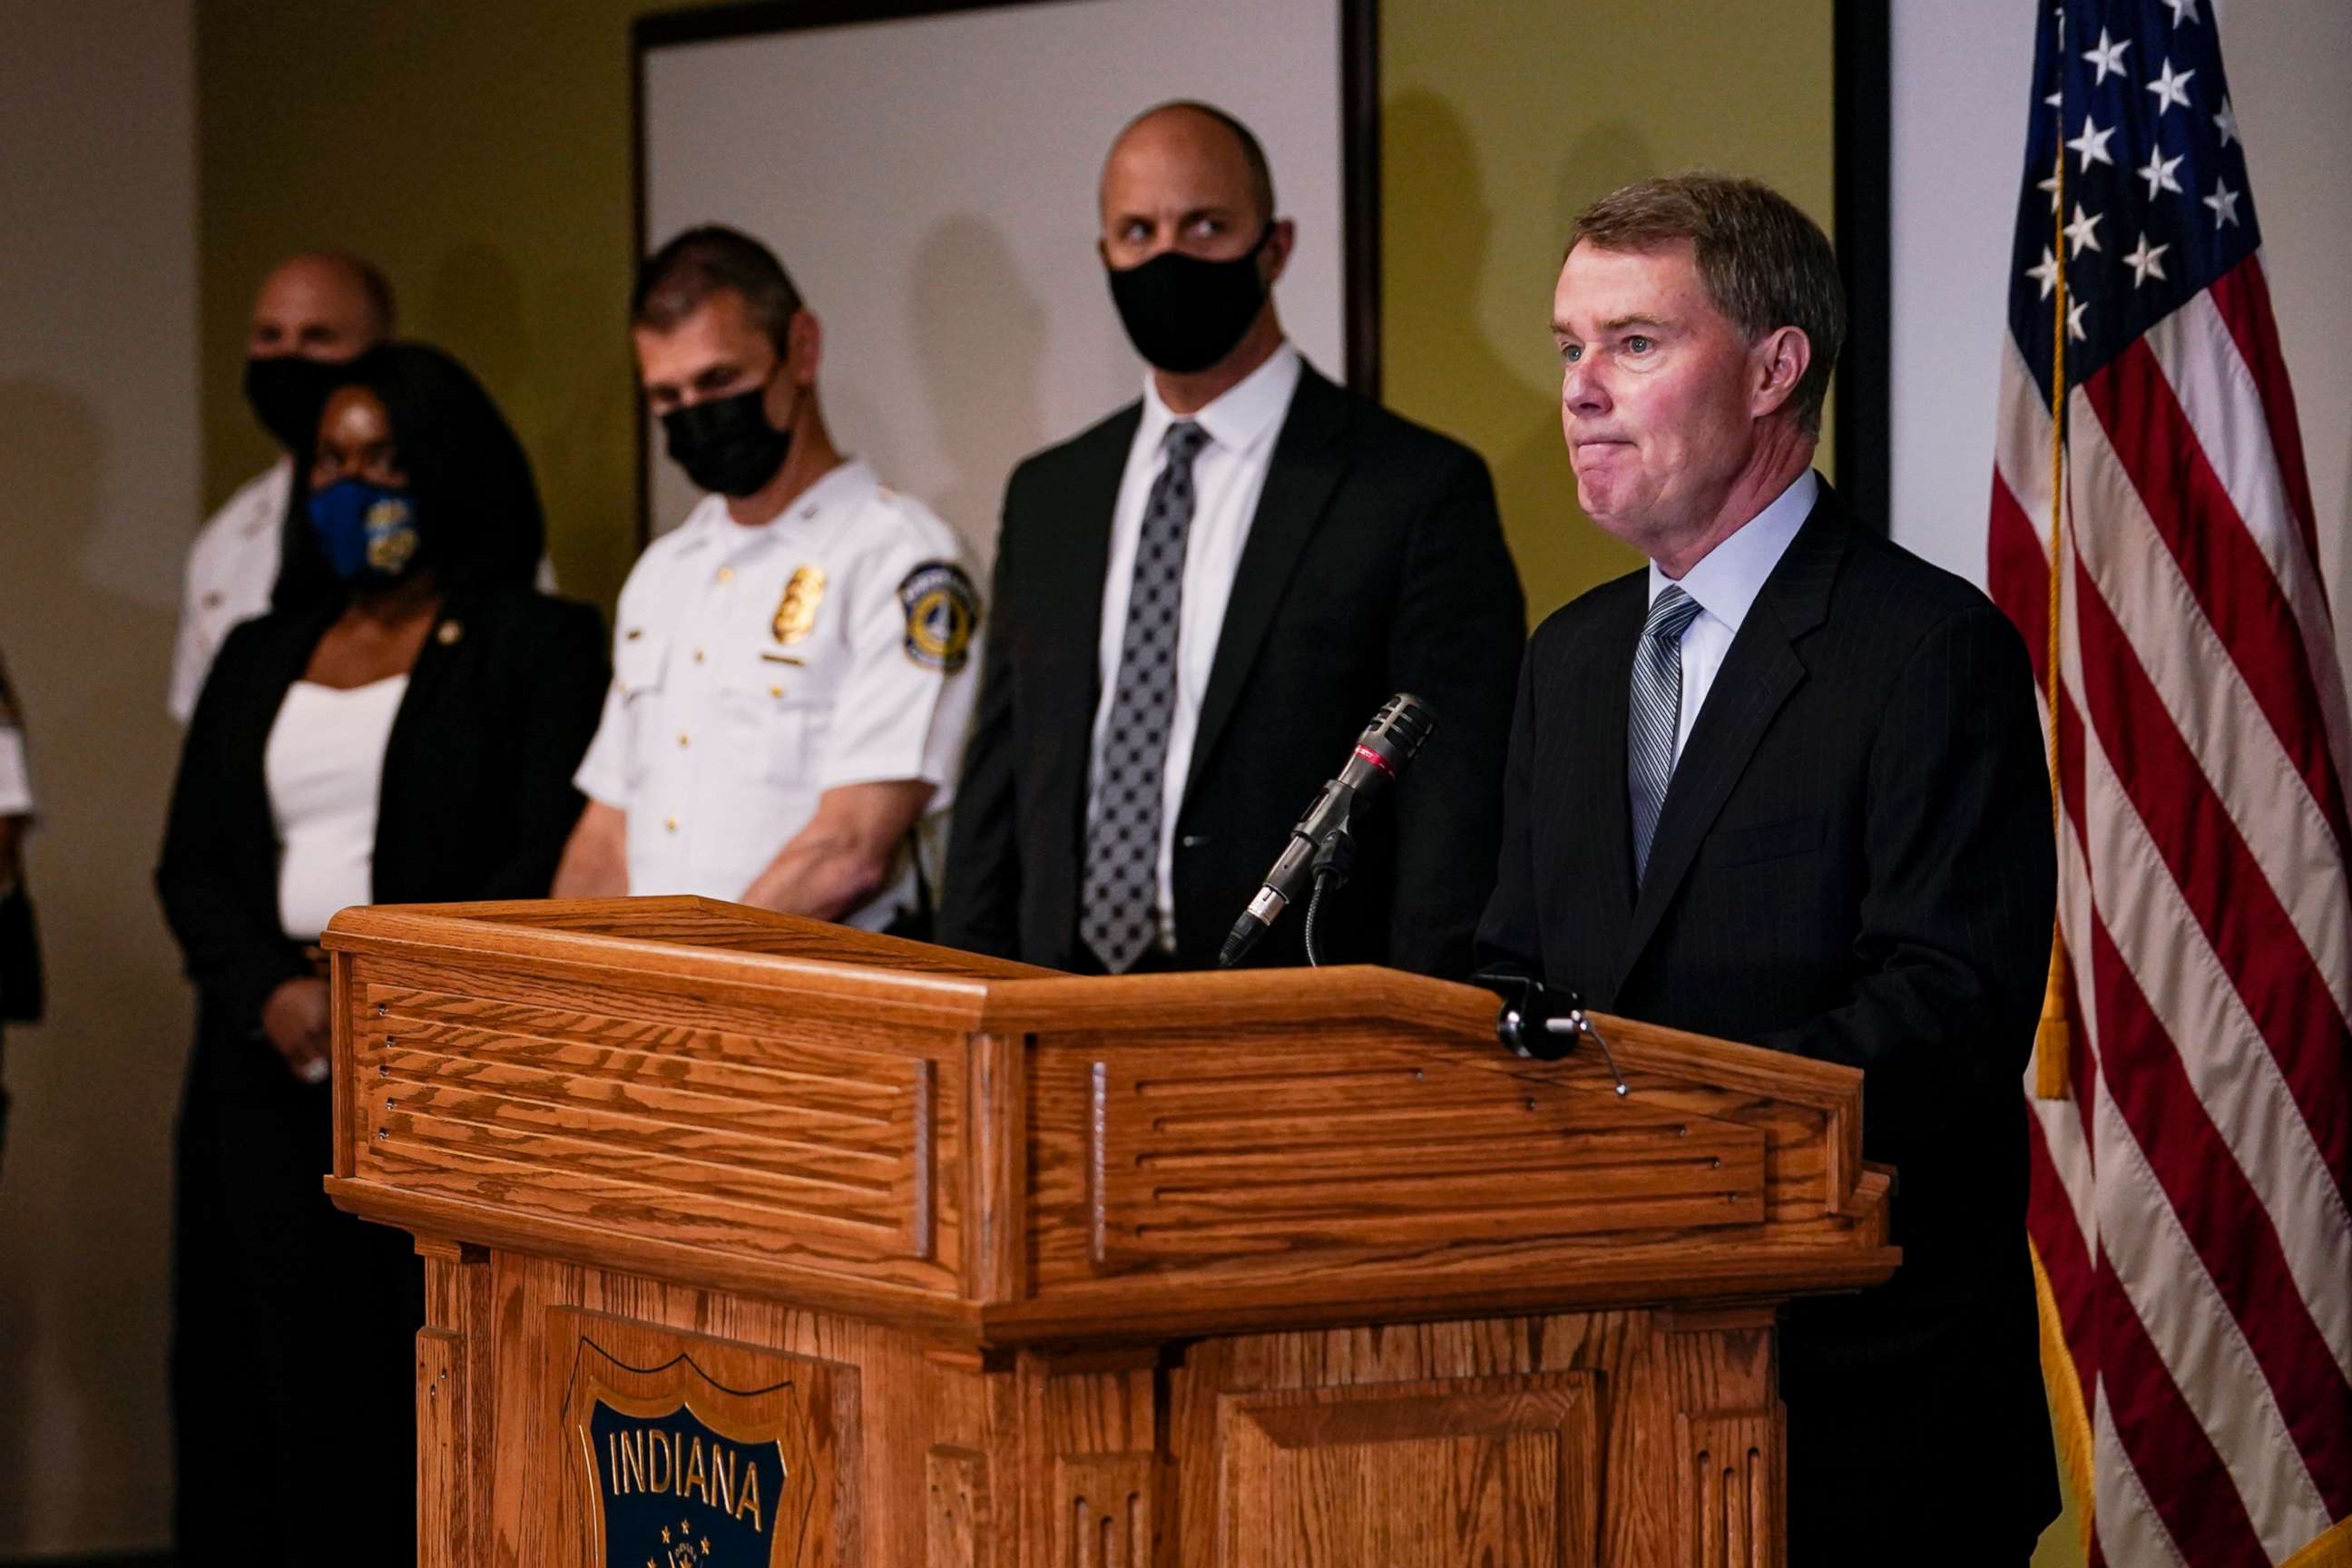 PHOTO: Indianapolis Mayor Joe Hogsett speaks at a news conference following a shooting at a FedEx facility in Indianapolis, April 16, 2021.